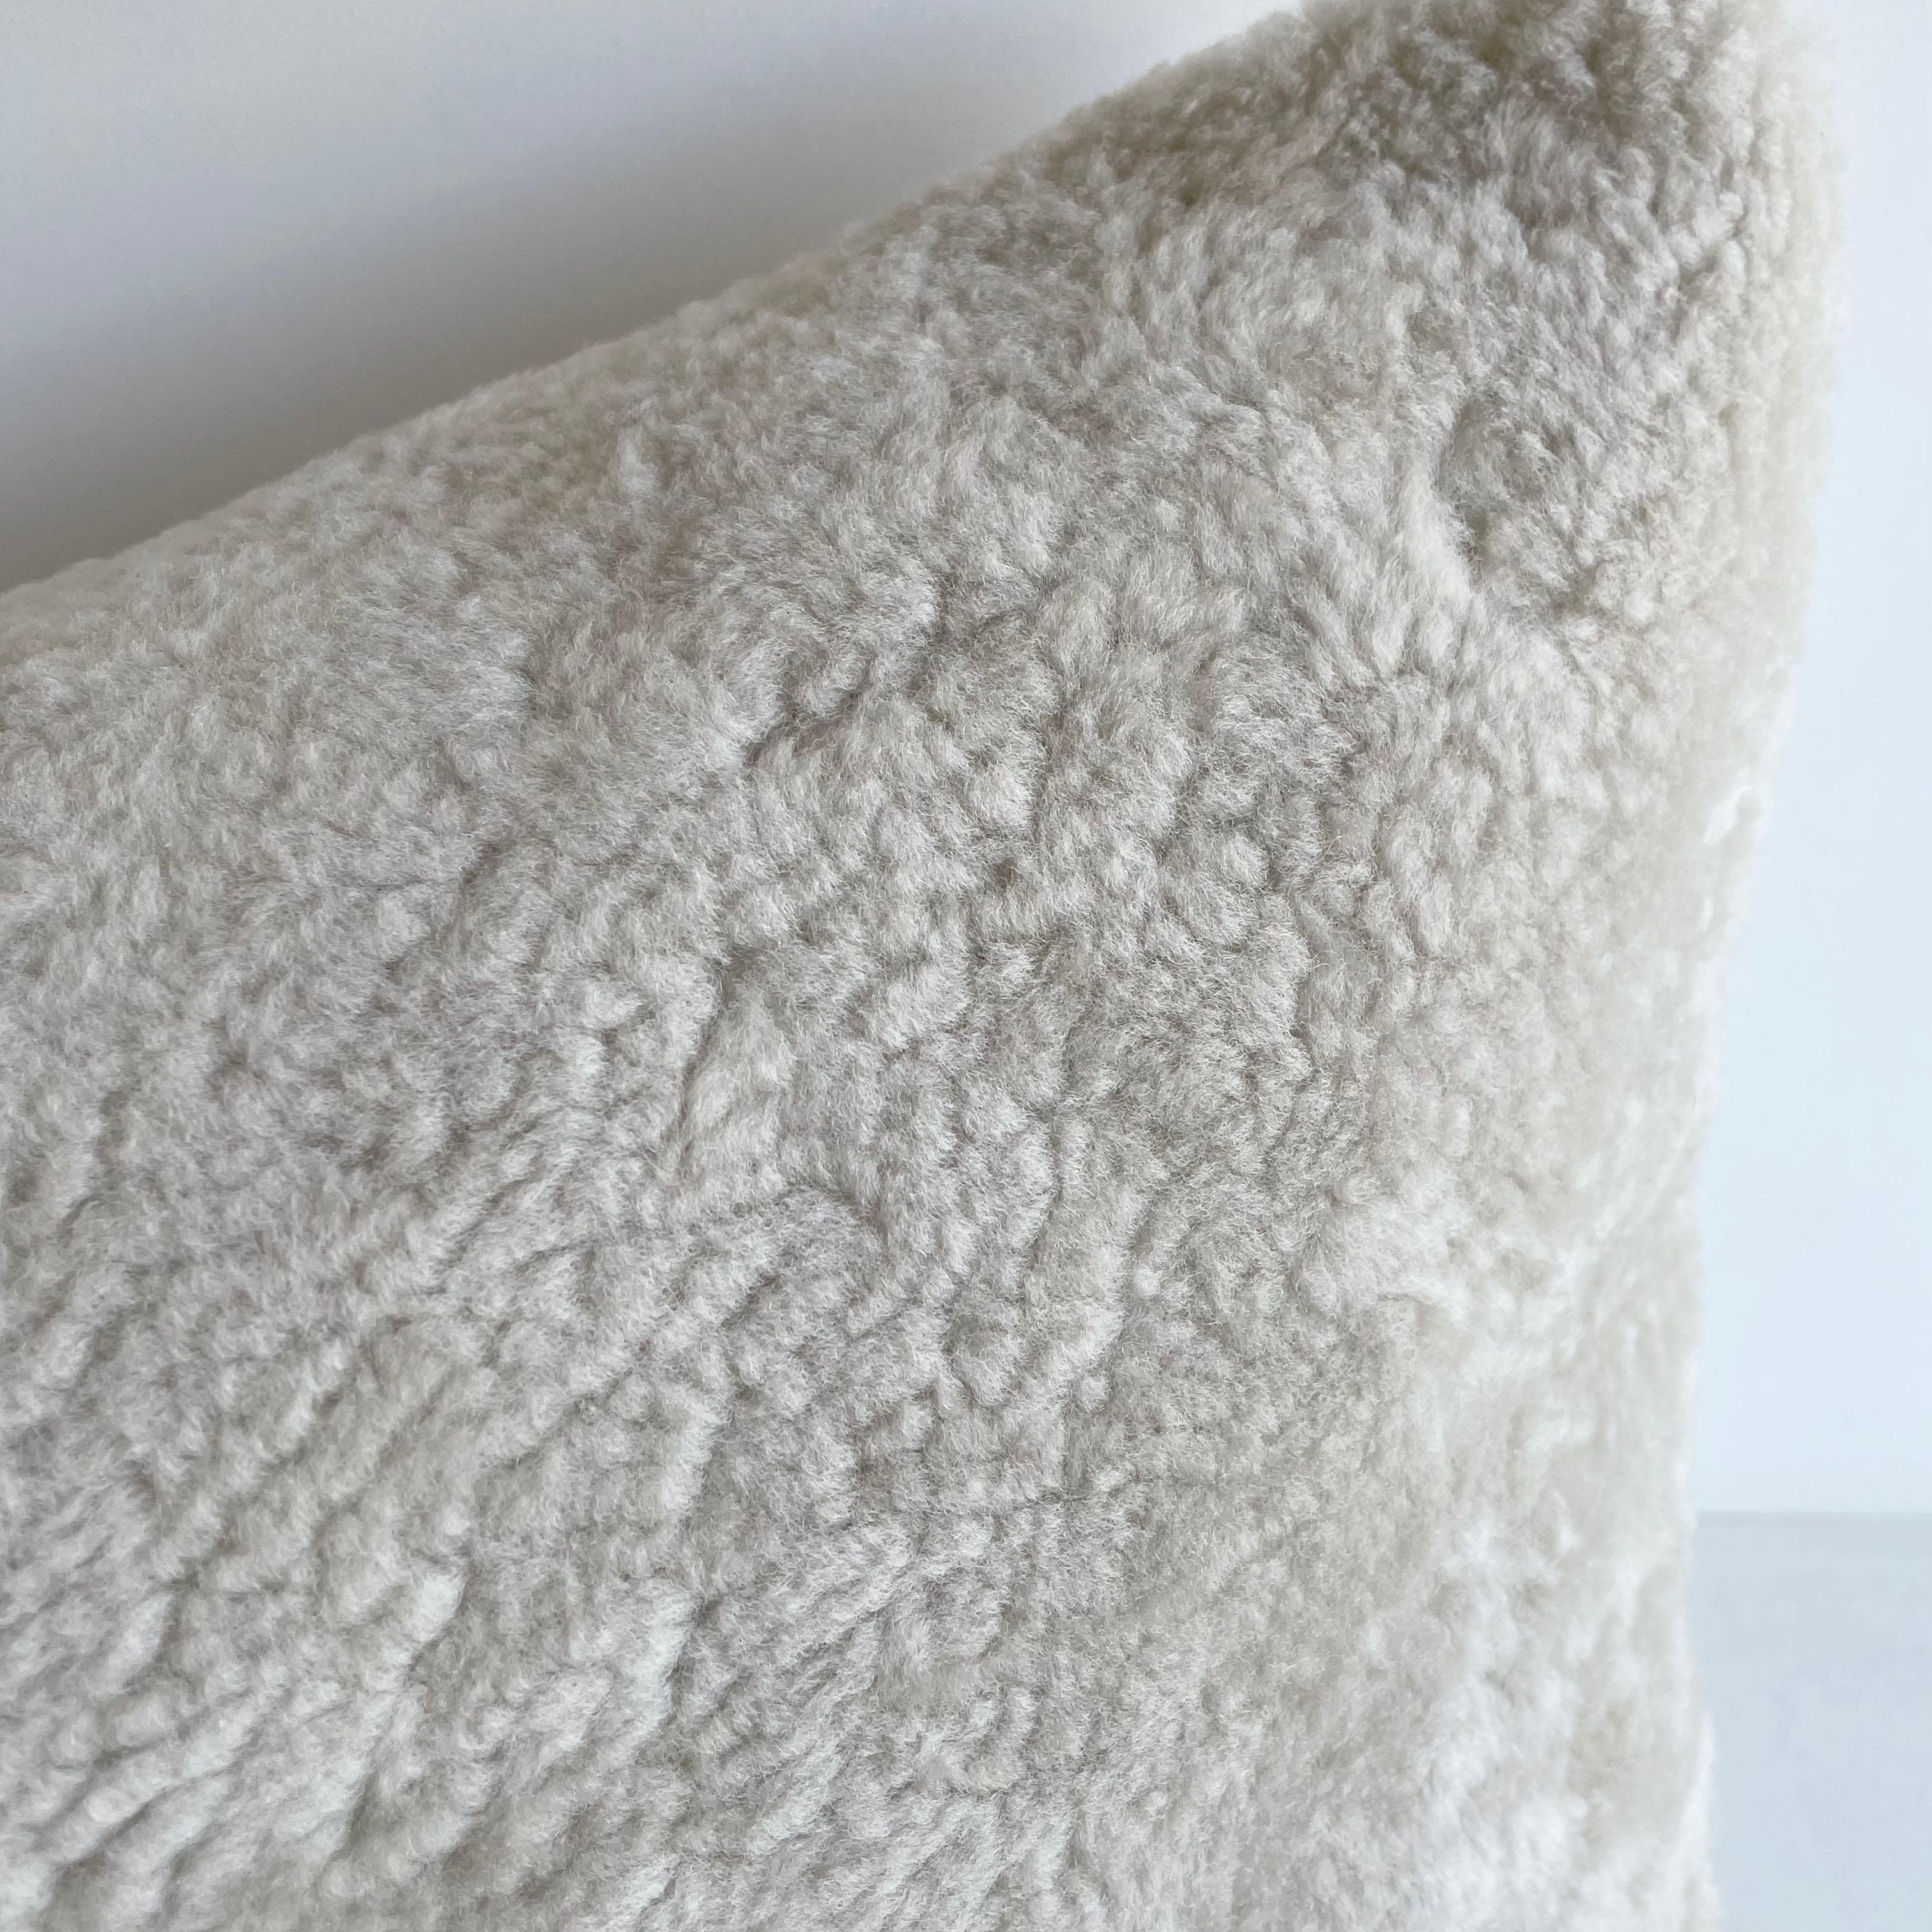 Beautiful custom made real shearling sheep lumbar pillow in natural color DOUBLE SIDED for ALL PILLOWS
Sizes: Natural Sherpa
(1) 14